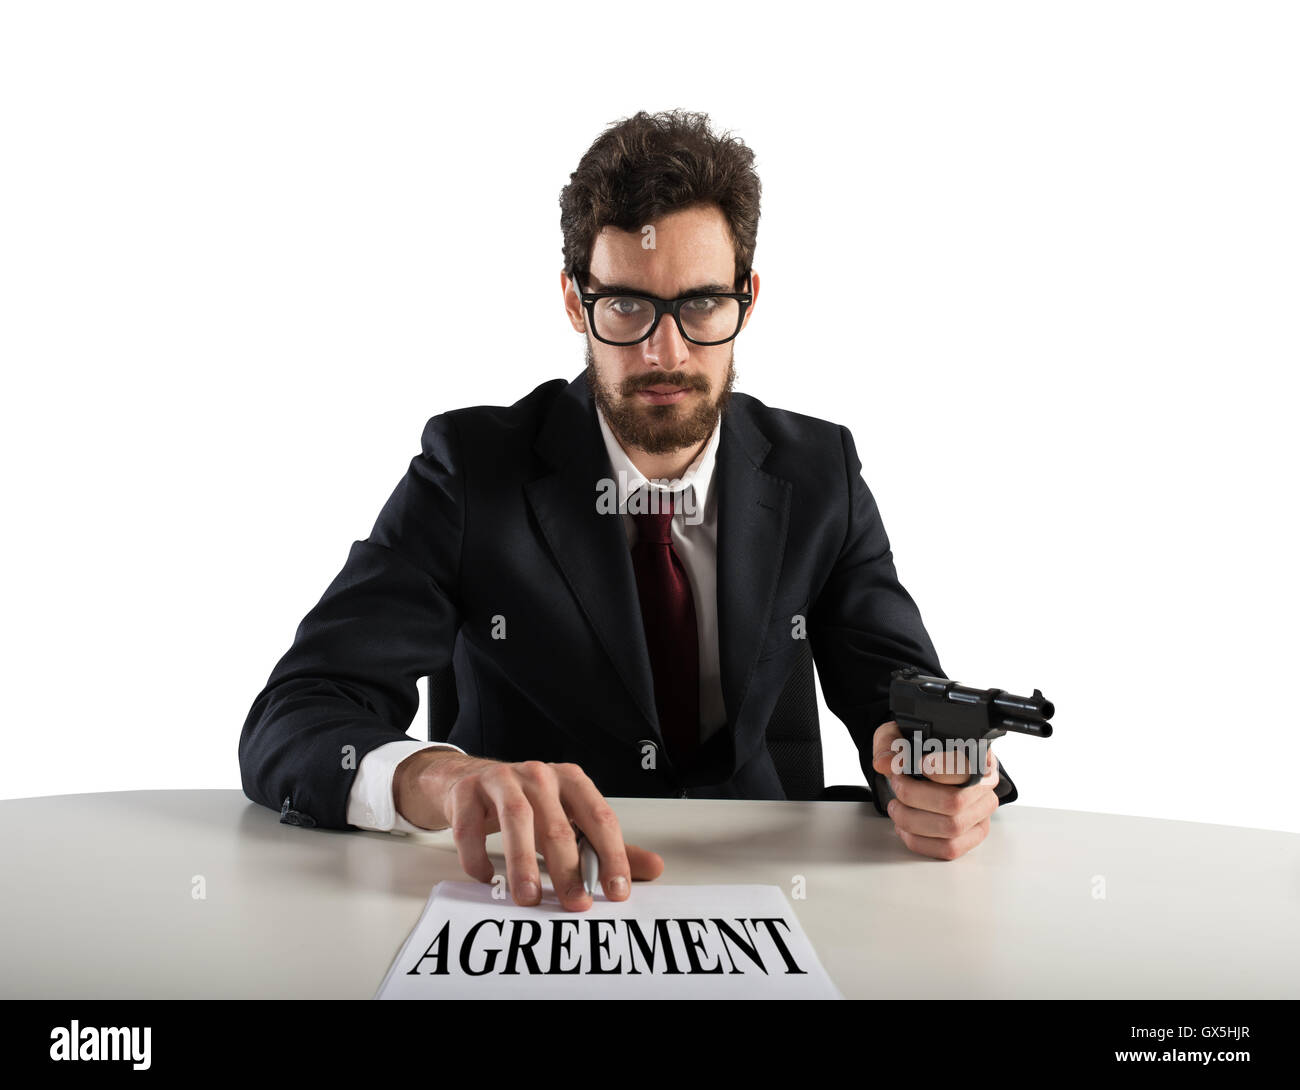 Boss forces you to sign an agreement Stock Photo